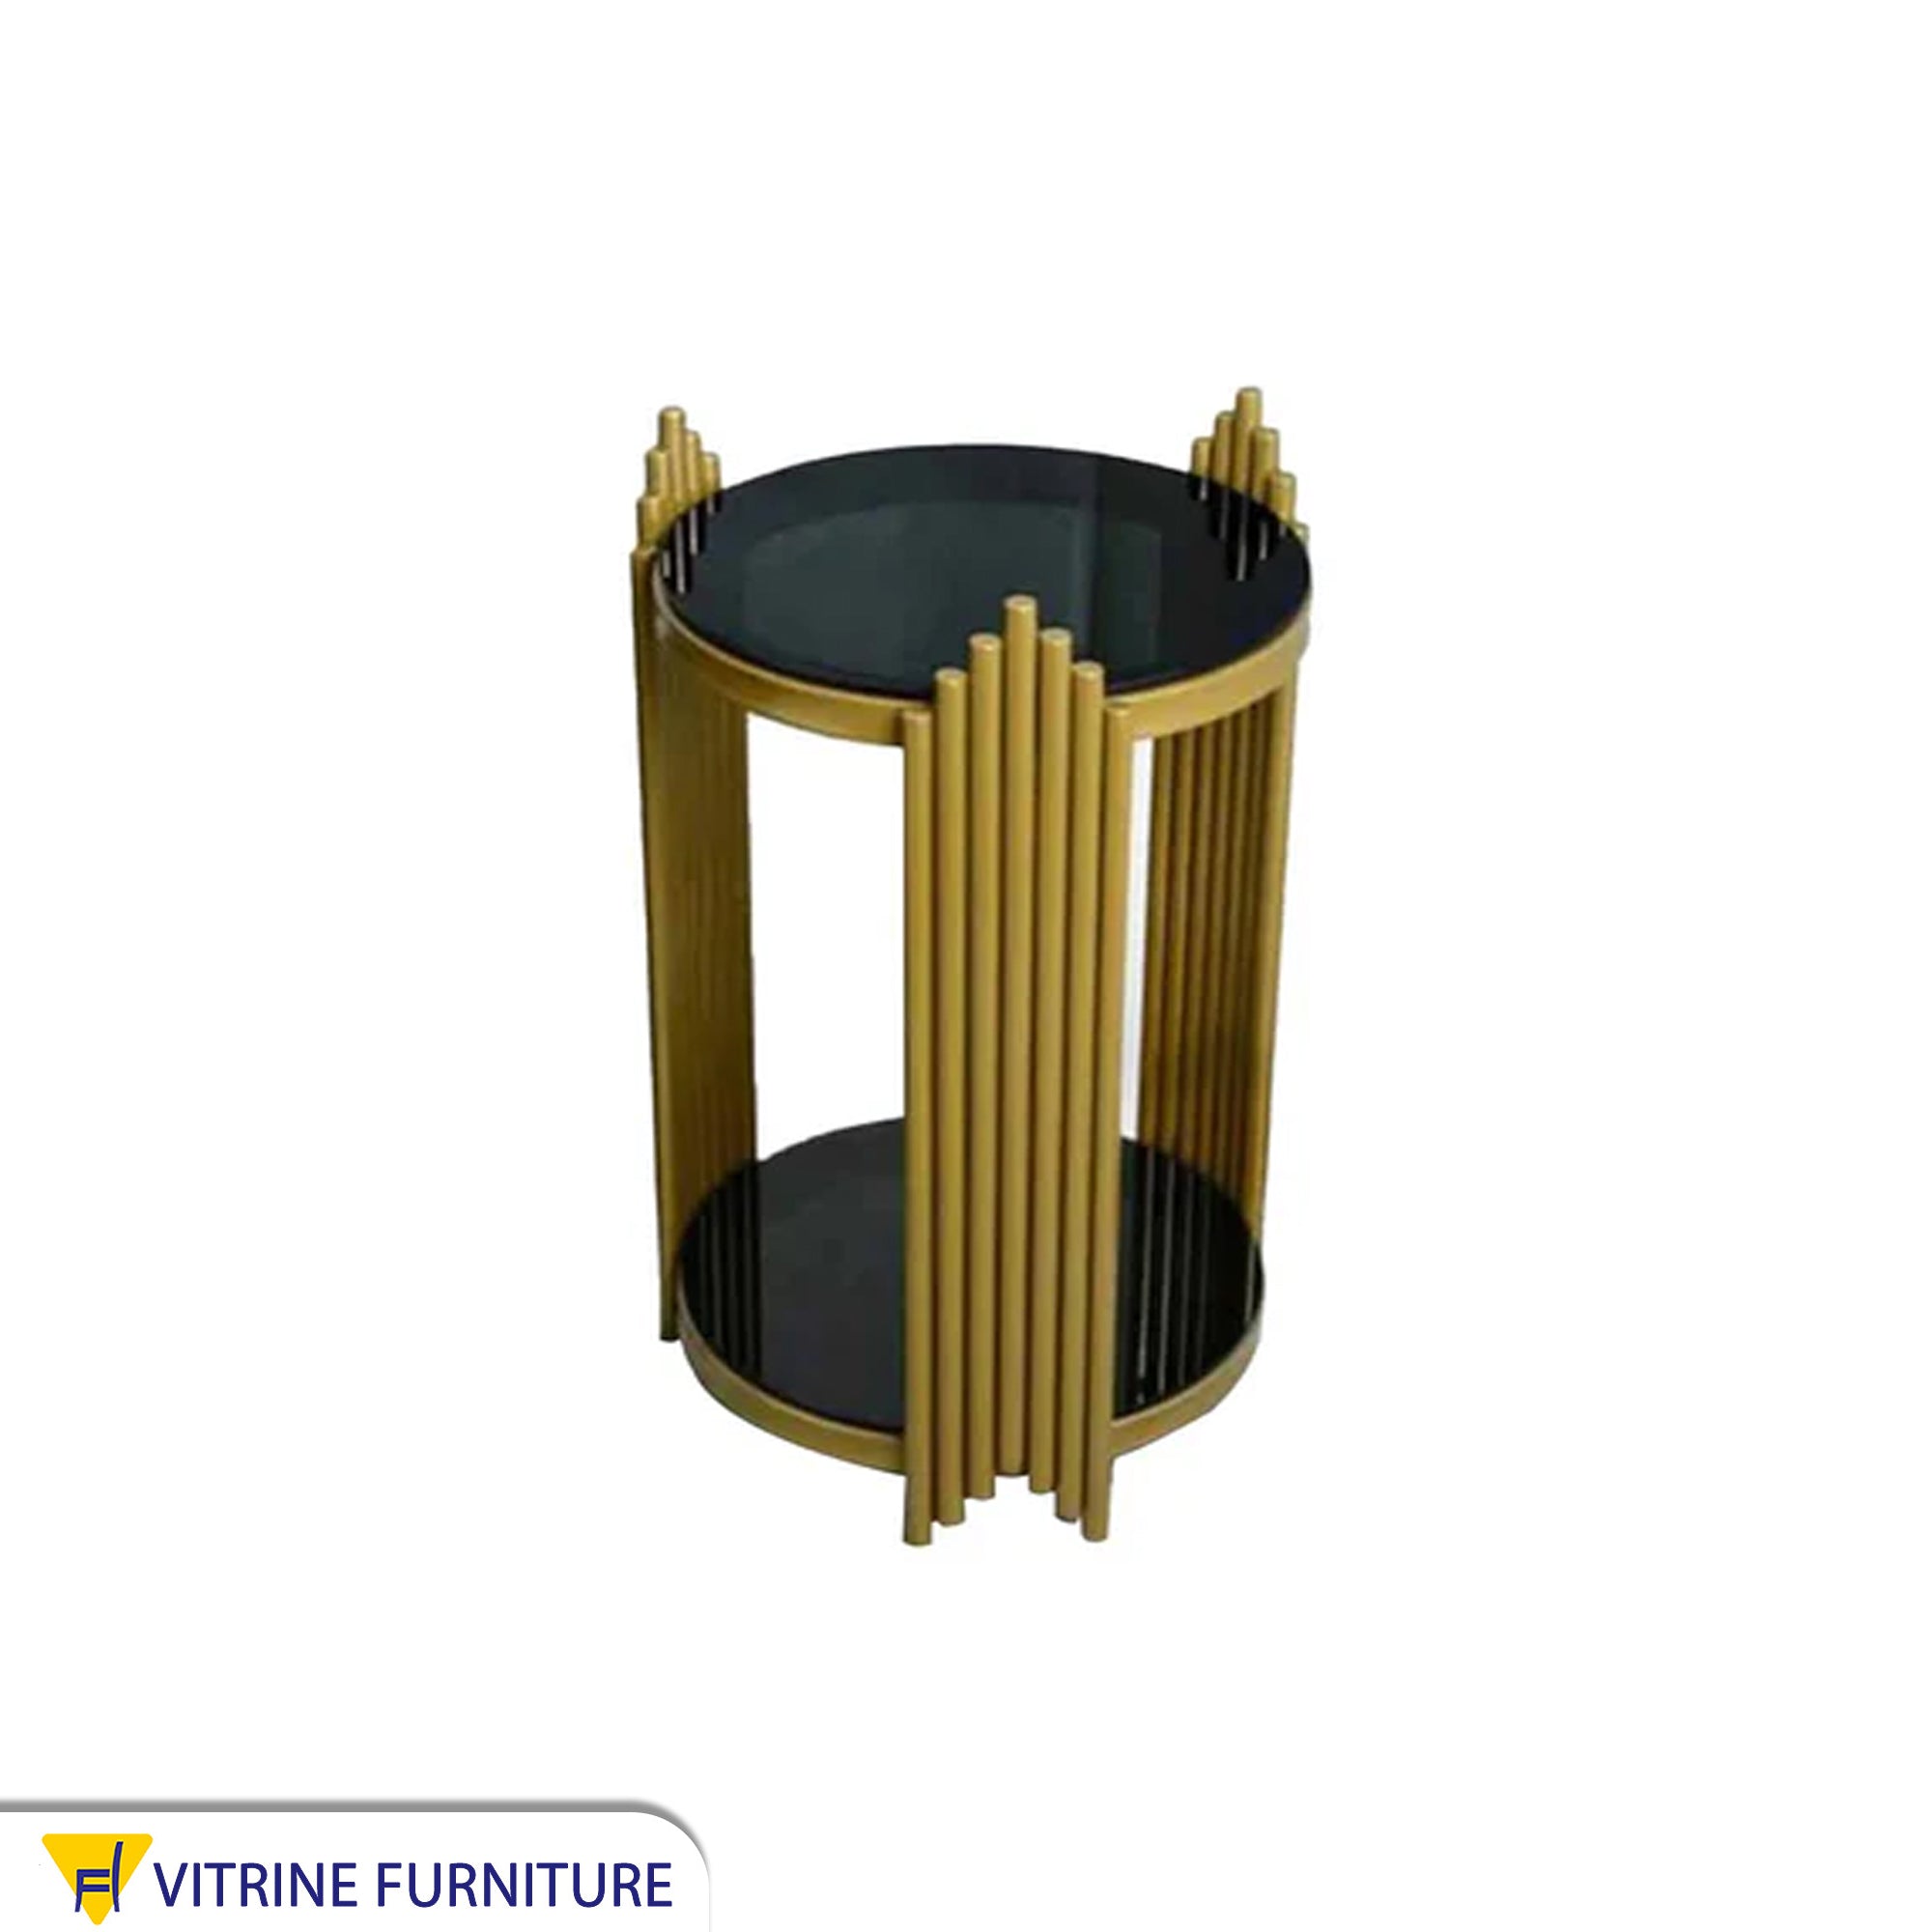 Small coffee table in black and gold